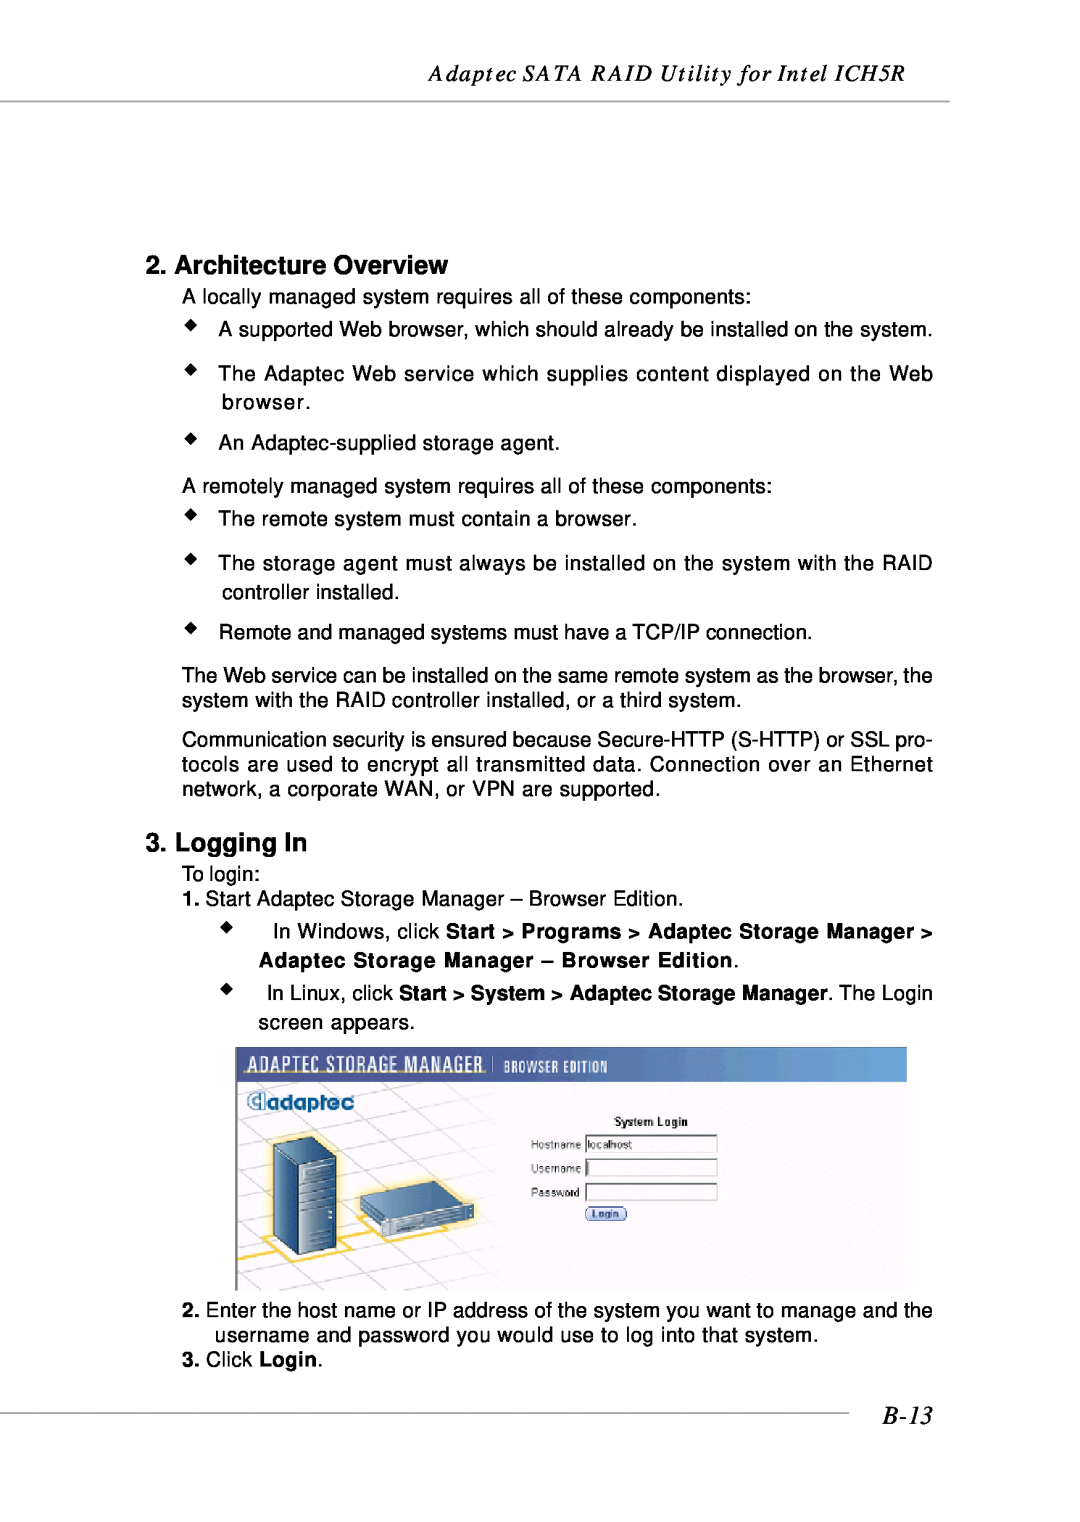 MSI MS-9246 manual B-13, Architecture Overview, Logging In, Adaptec SATA RAID Utility for Intel ICH5R 